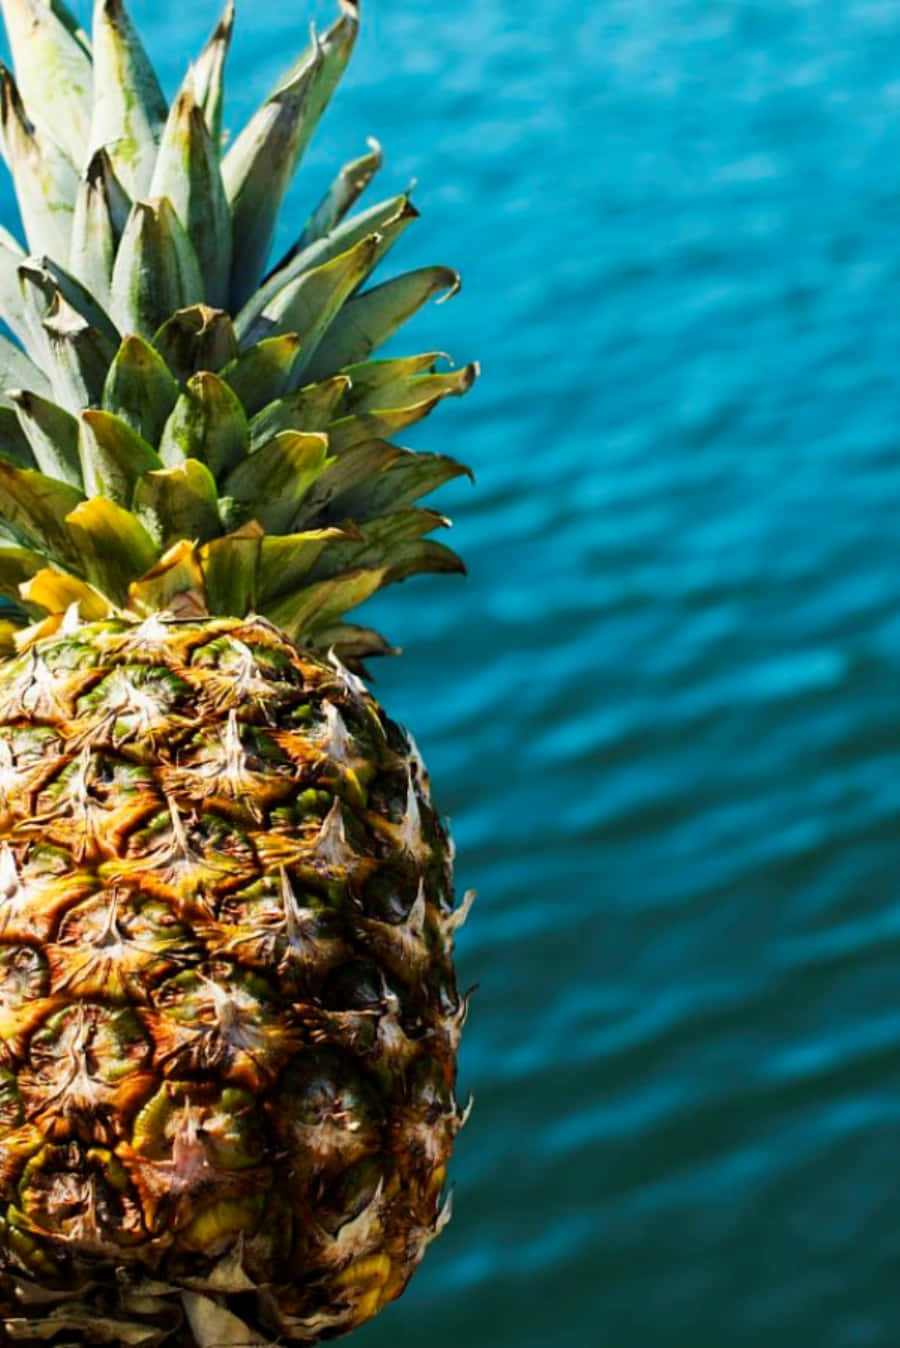 Enjoy a Sweet and Tasty Pineapple